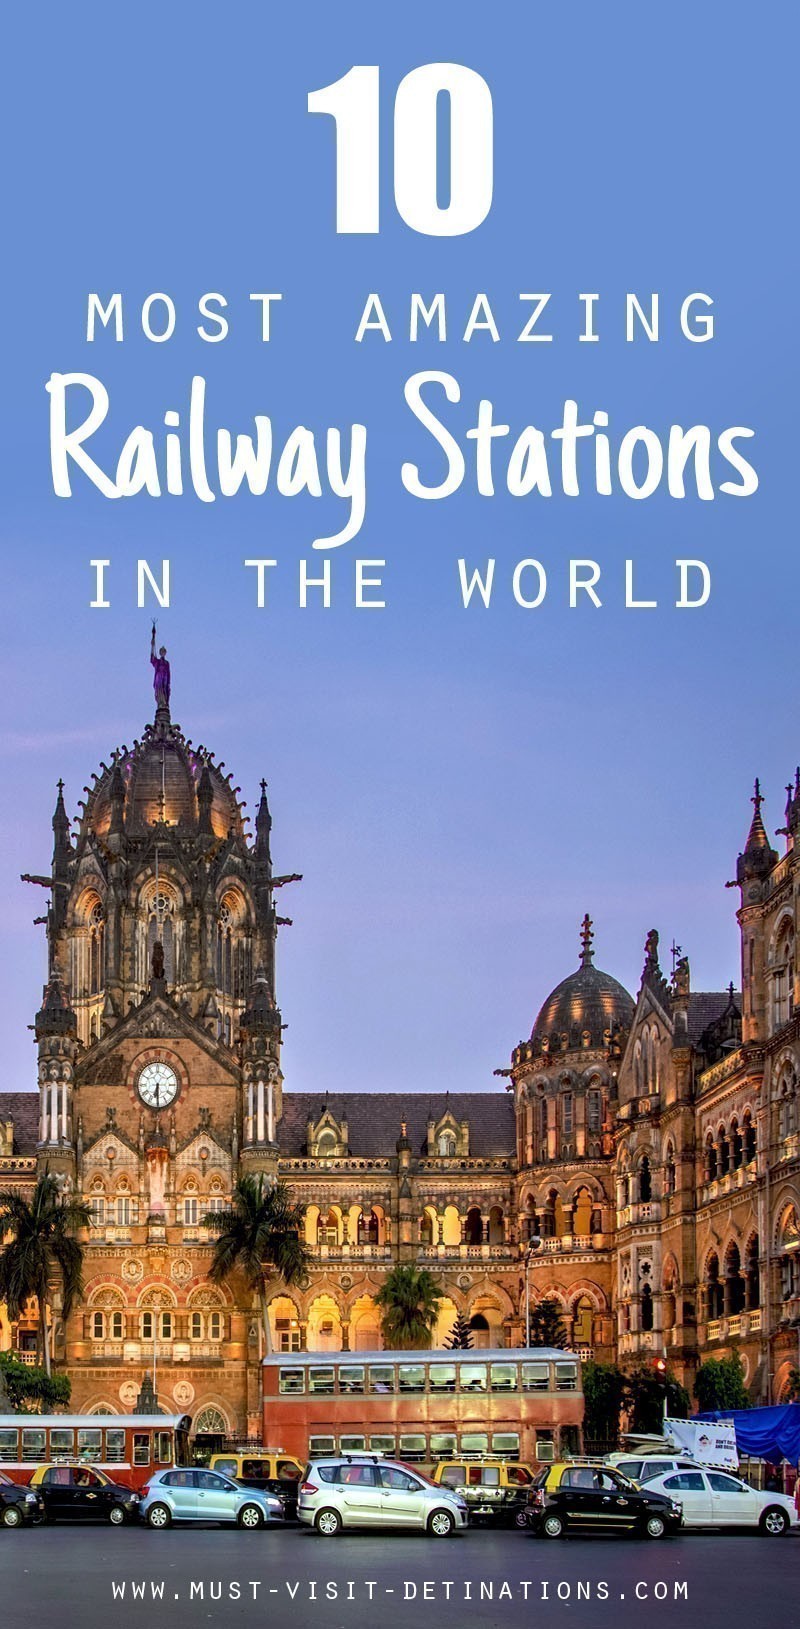 10 Most Amazing Railway Stations in the World #travel #world